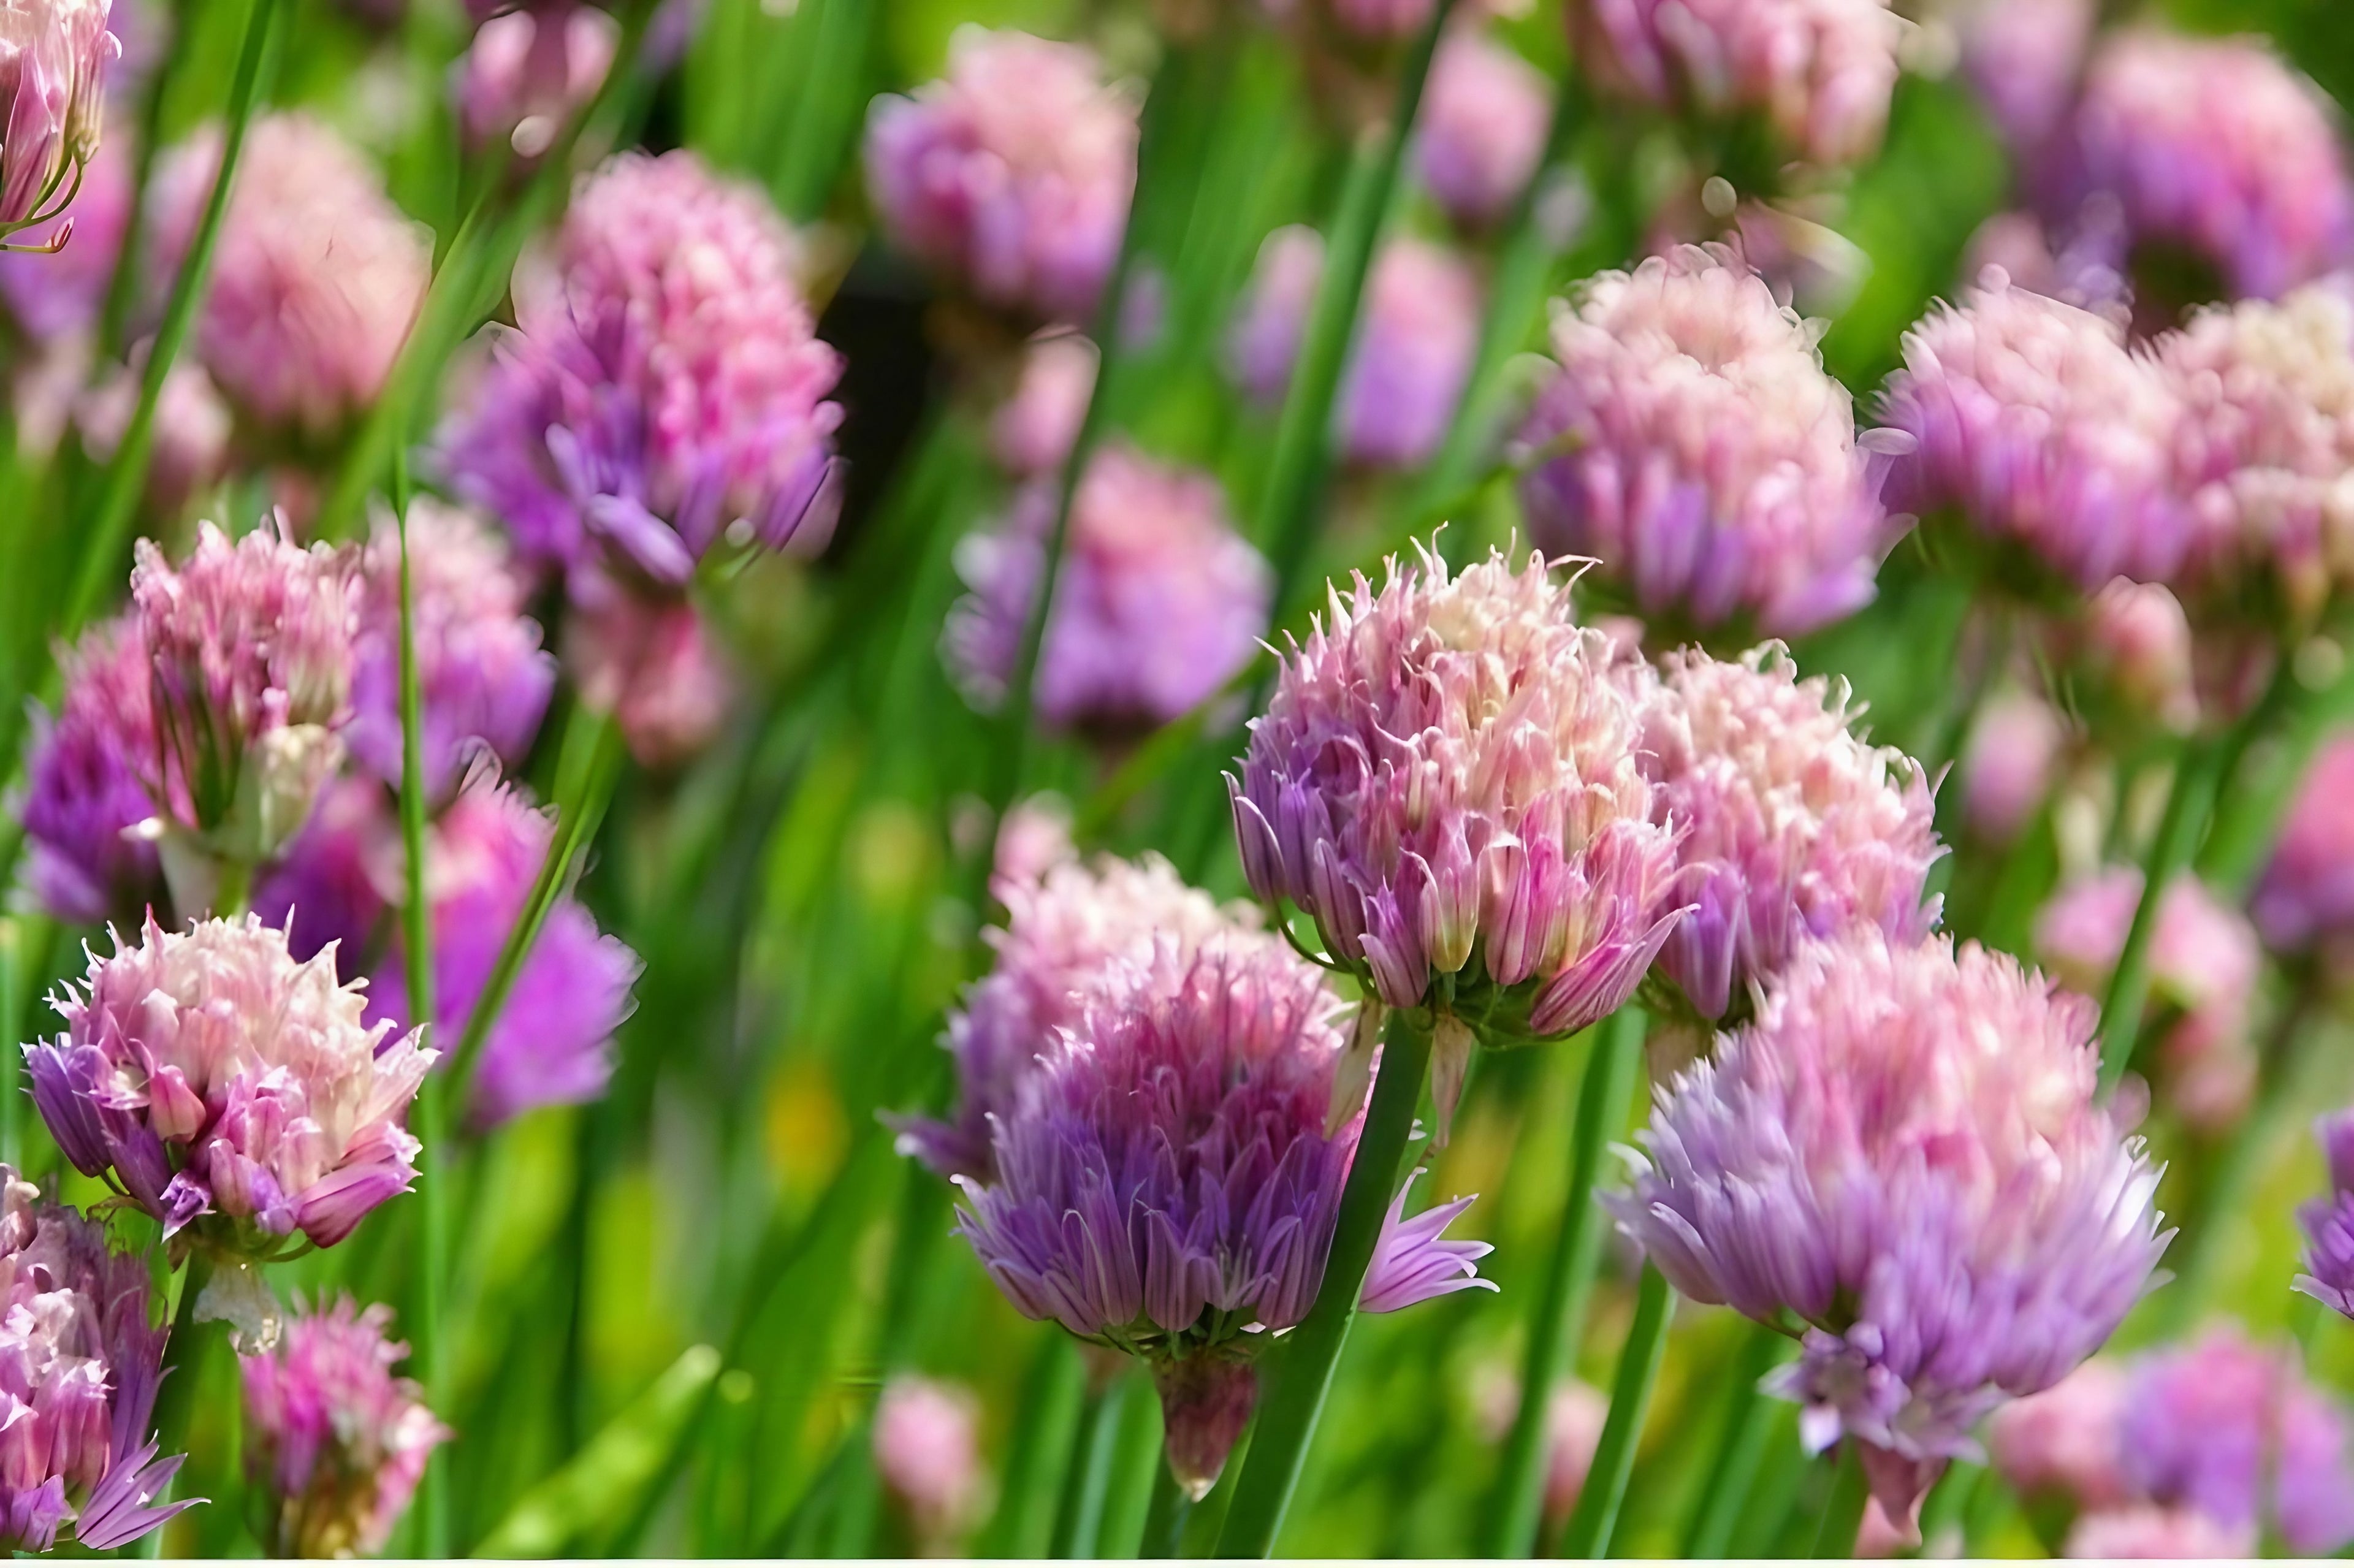 Lush chives with delicate purple flowers growing in a field